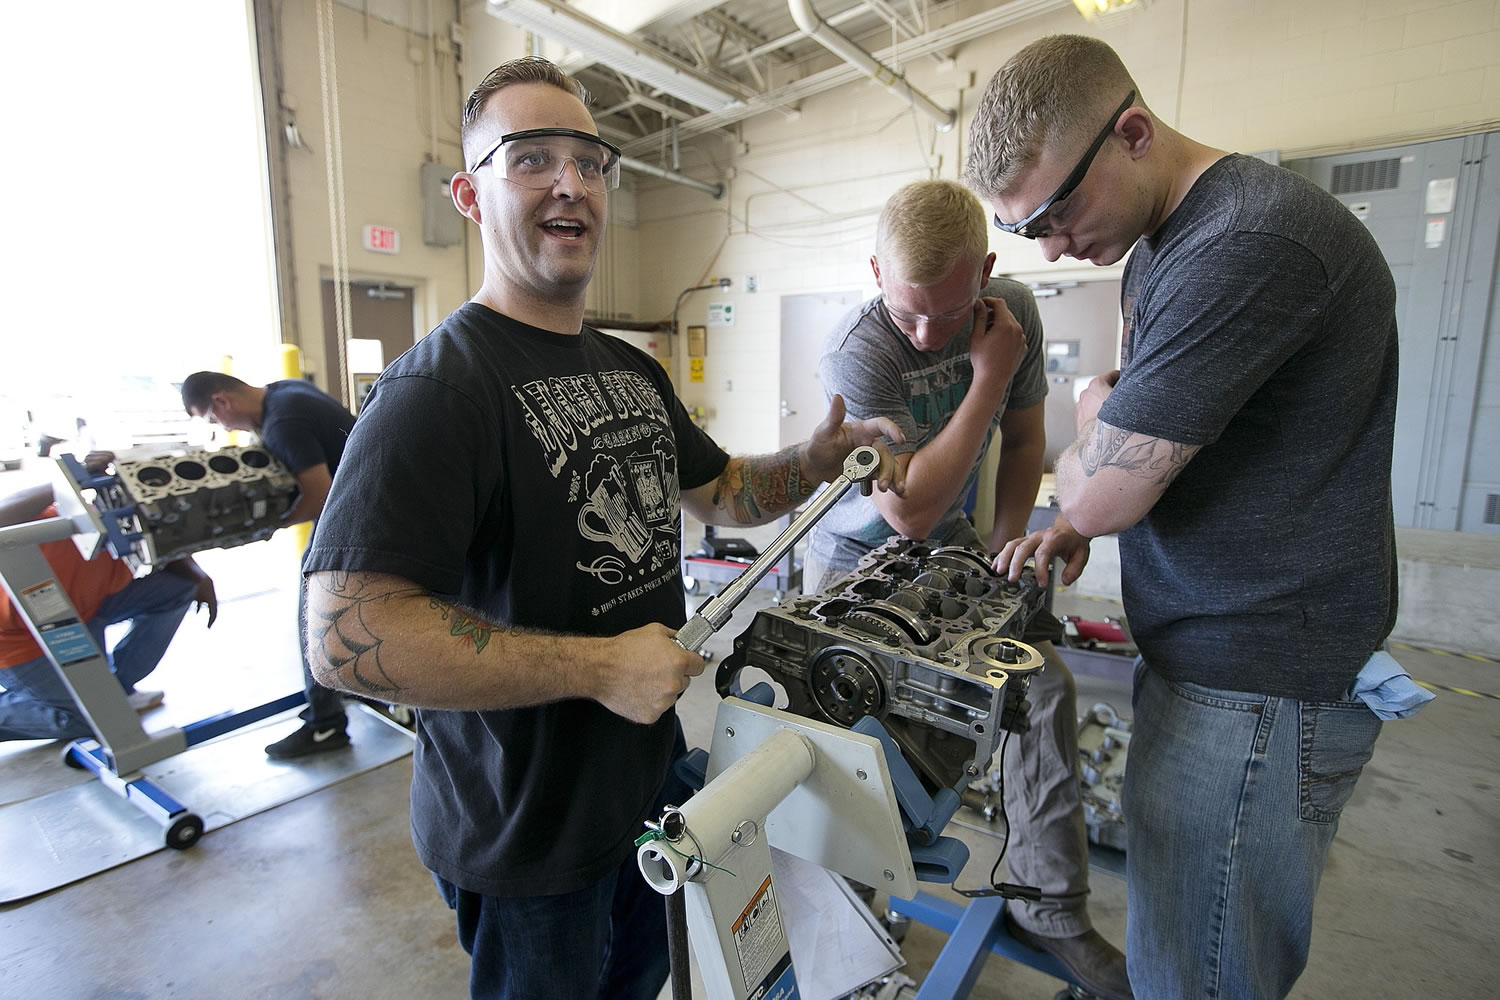 Sgt. Garret Baganz, from left, Spc. Tyler Sonsoucie and Spc. Ian Sokol work on a ecotech engine during a June 18 automotive skills class at Fort Hood, Texas. The men are participants in Shifting Gears, a program sponsored by General Motors that teaches automotive skills and tries to match participants with dealerships around the country. The Labor Department reported Friday that U.S. employers added 215,000 jobs in July.